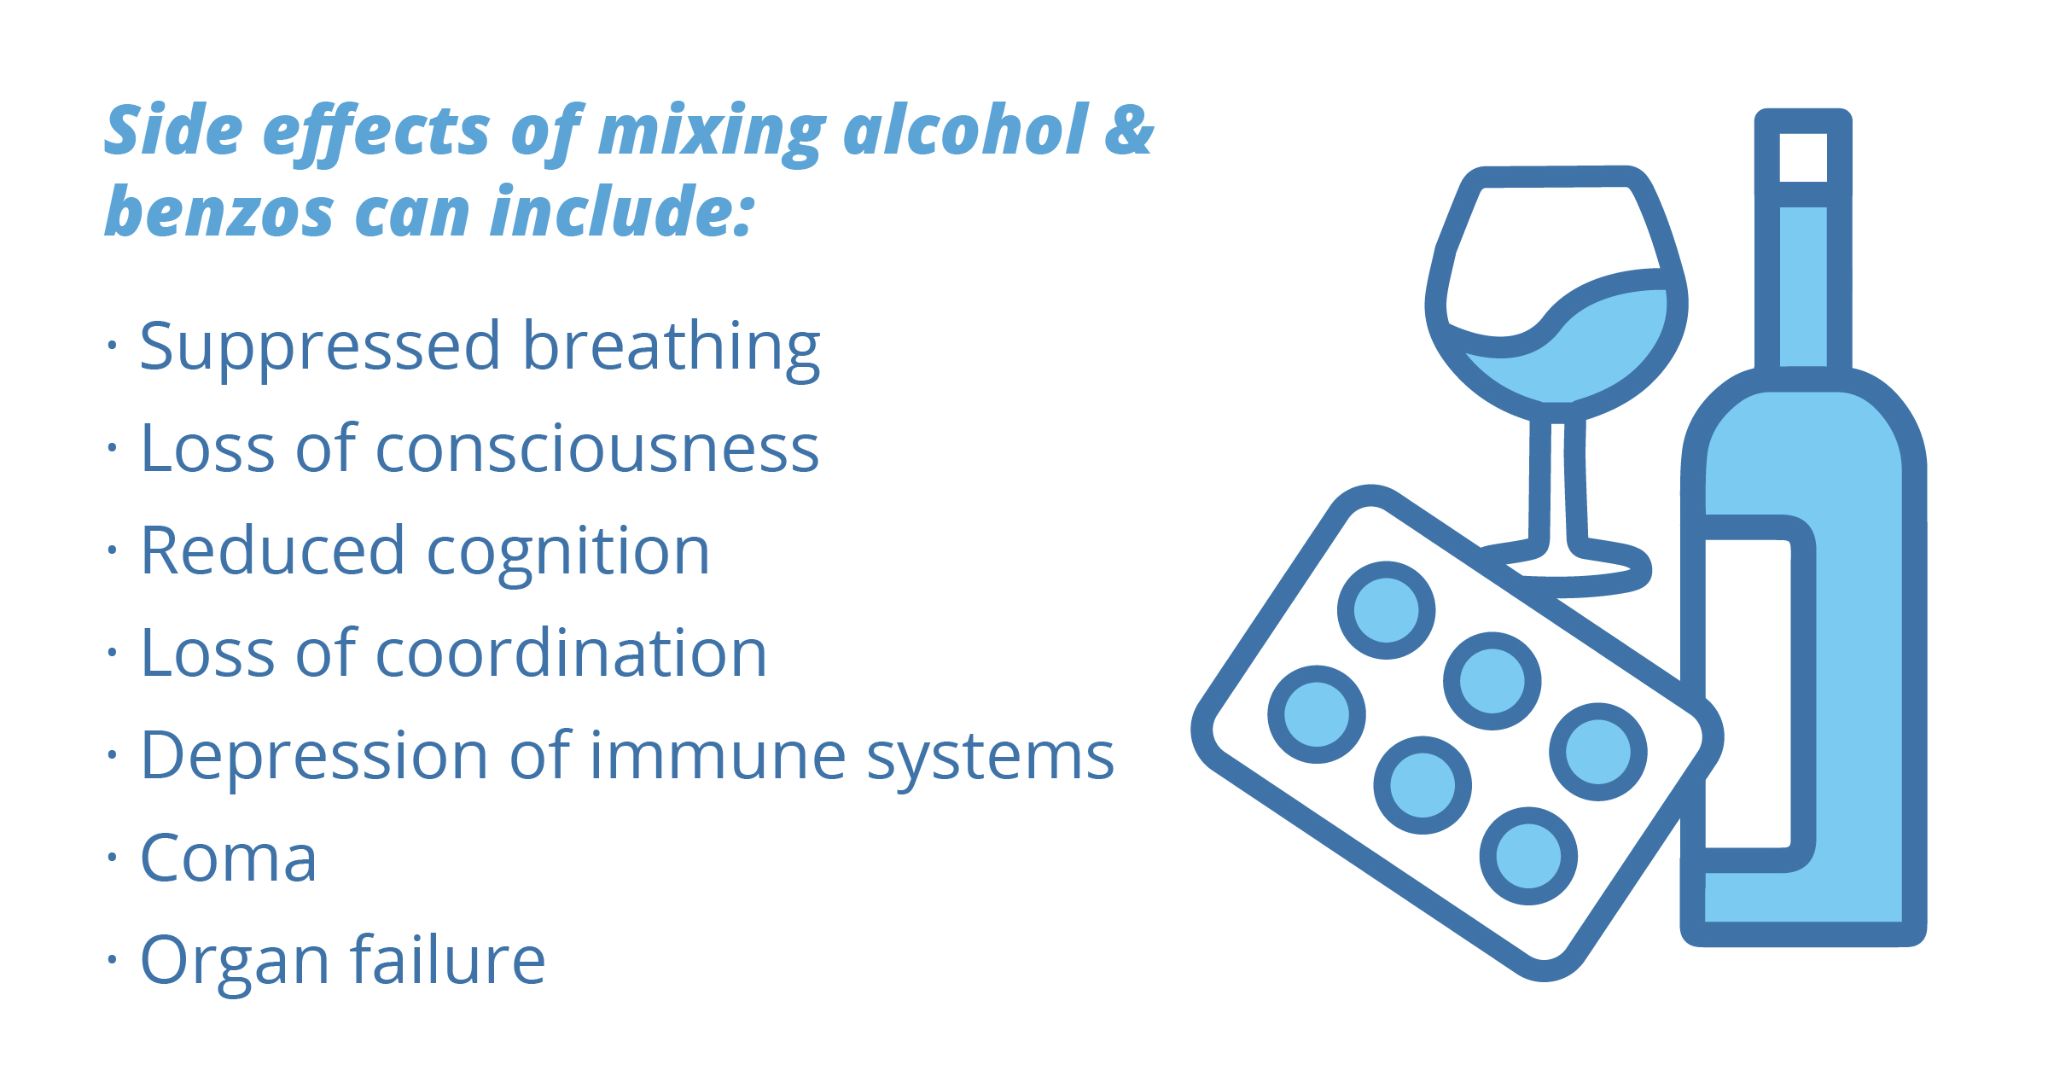 Side effects of mixing alcohol & benzos can include: suppressed breathing, loss of consciousness, reduced cognition, loss of coordination, depression of immune systems, coma, and organ failure.